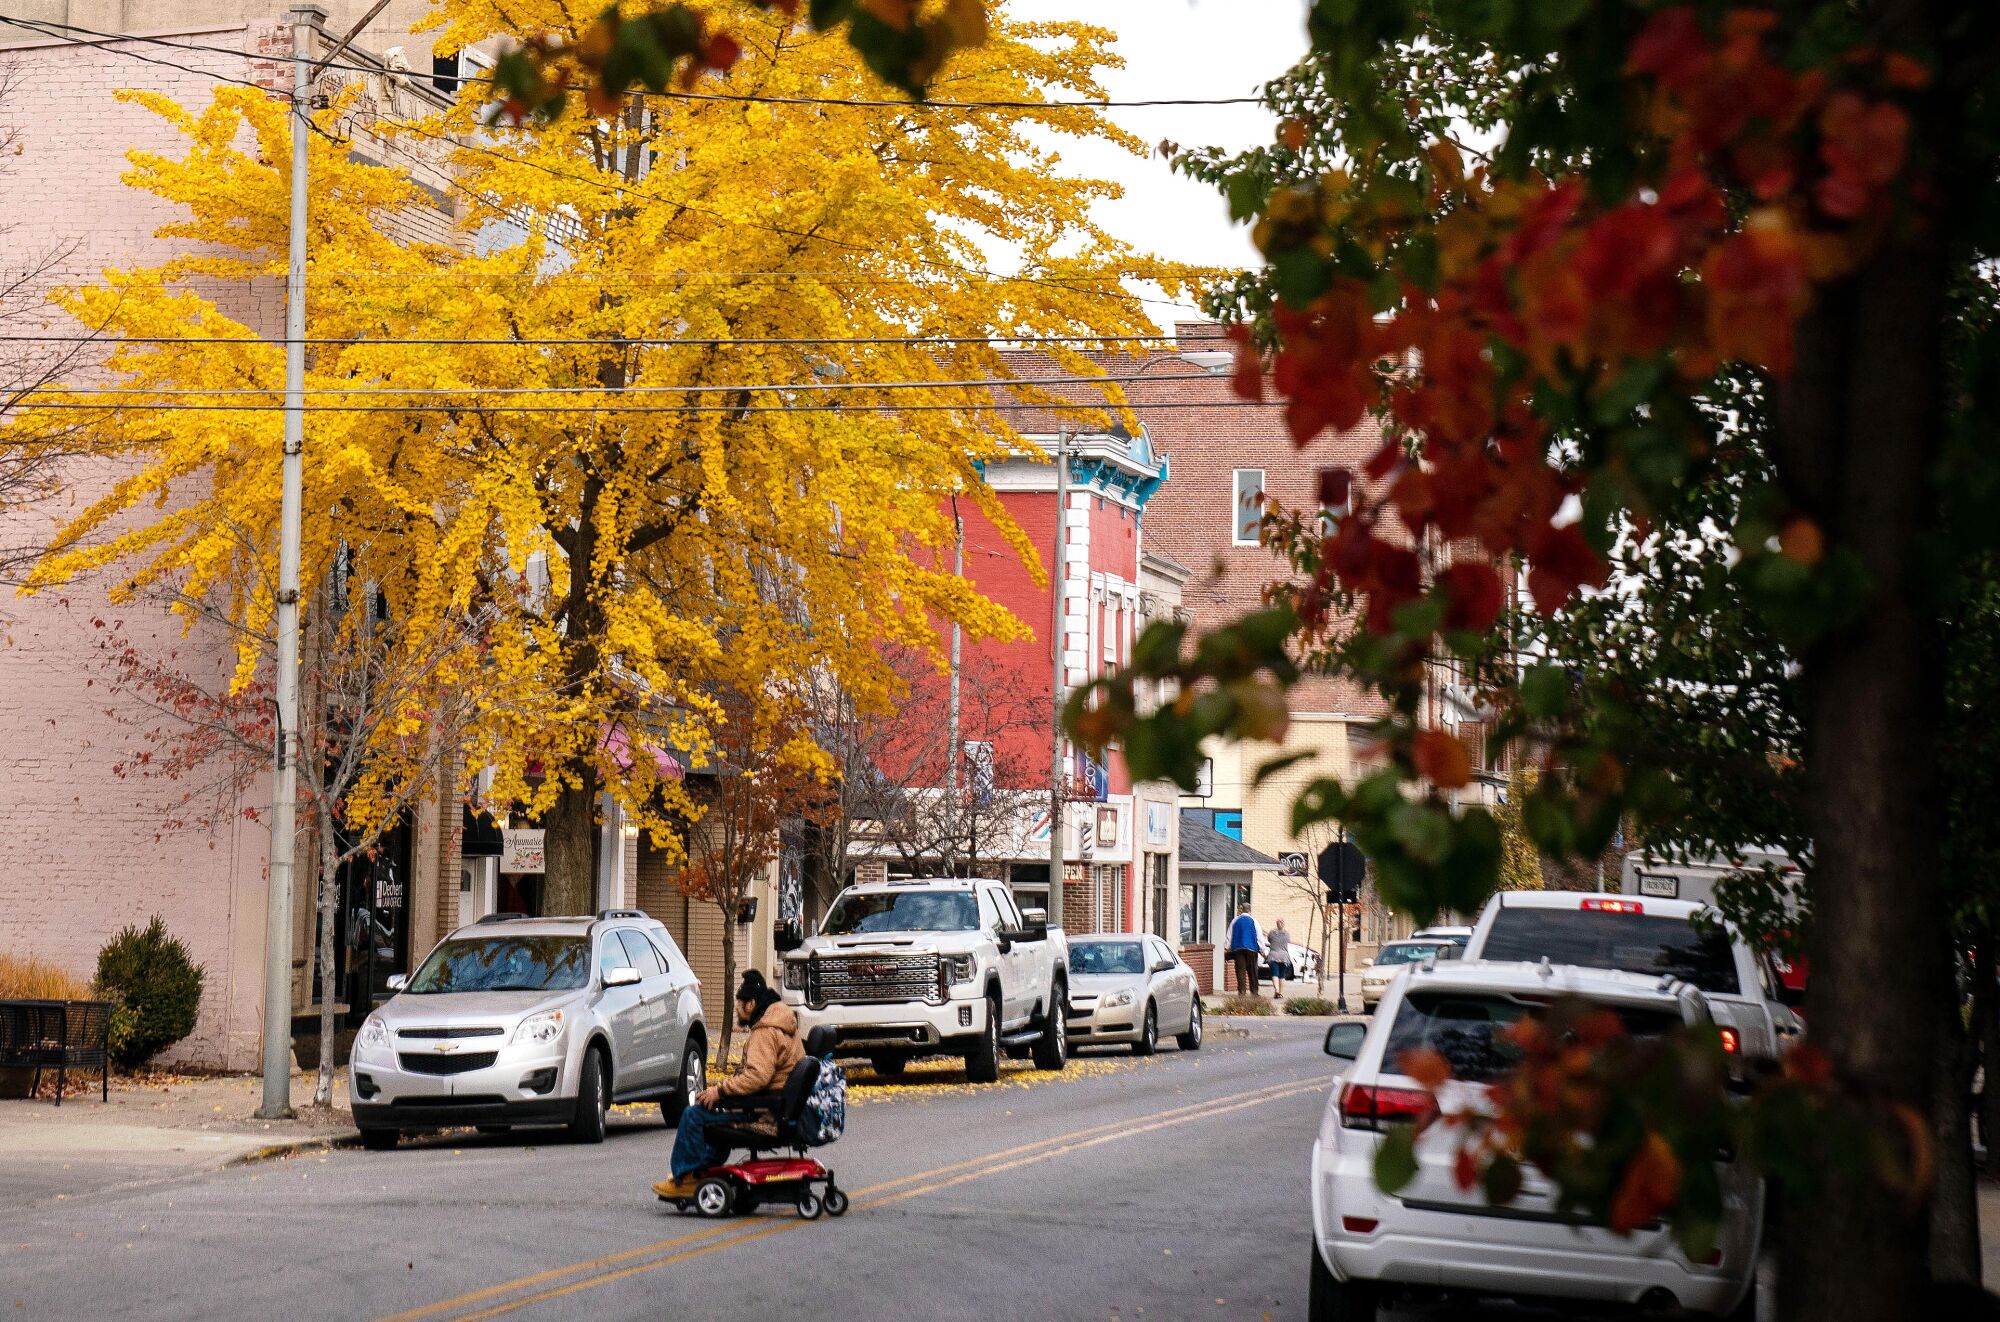 A tree awash with yellow fall foliage near buildings with cars parked along a street 